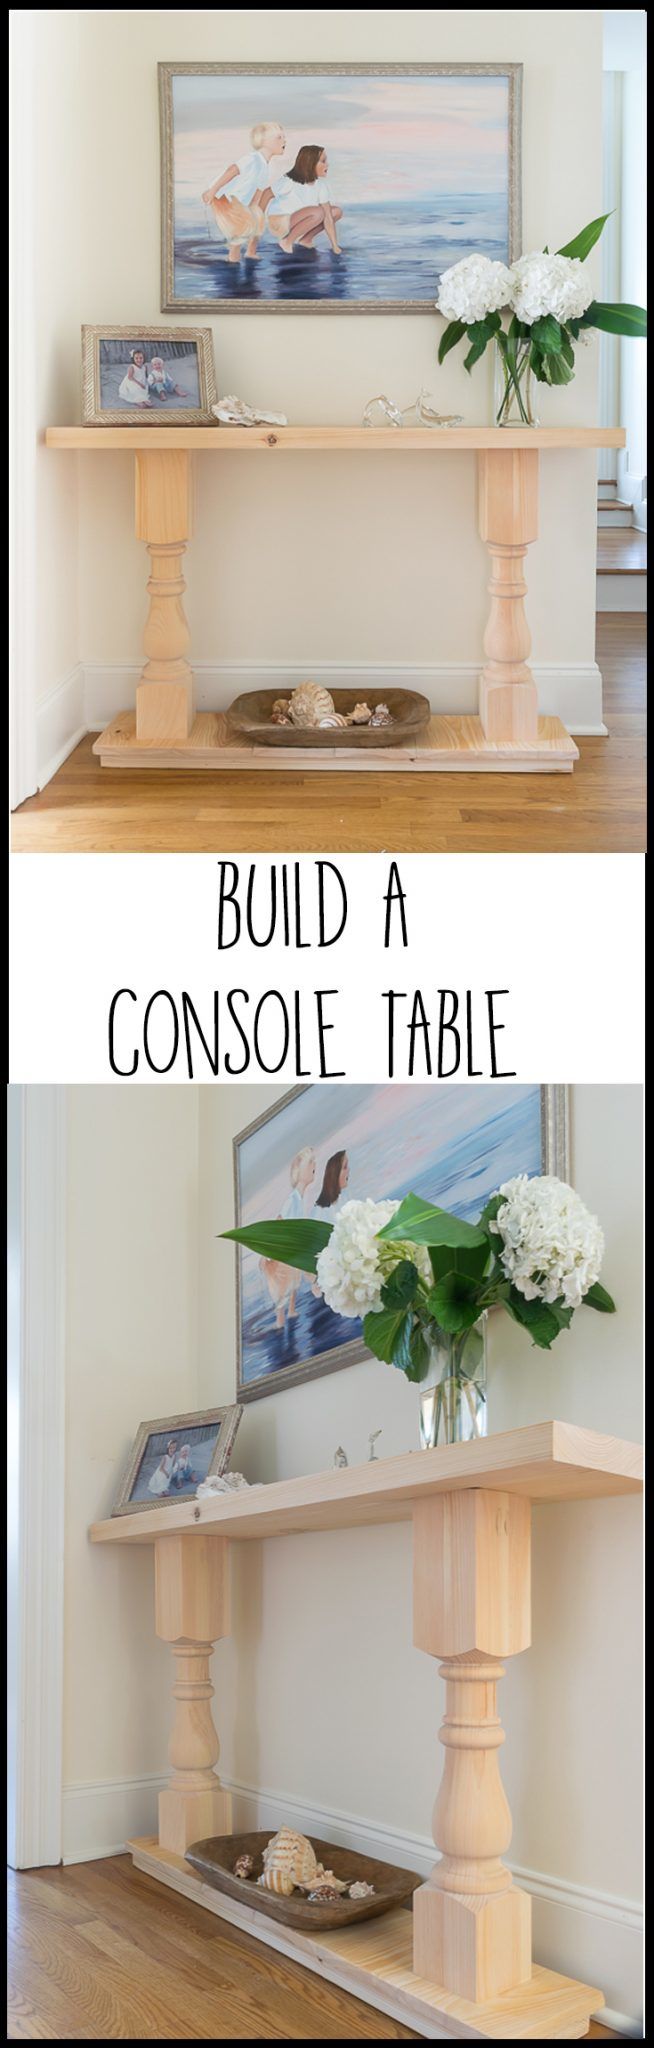 Yippee! I can check this off of my DIY bucket list! This easy DIY console table was the first piece of furniture I ever tried to build. Step by step, illustrated tutorial with recommended supplies and tools. A perfect spruce up for my home decor.